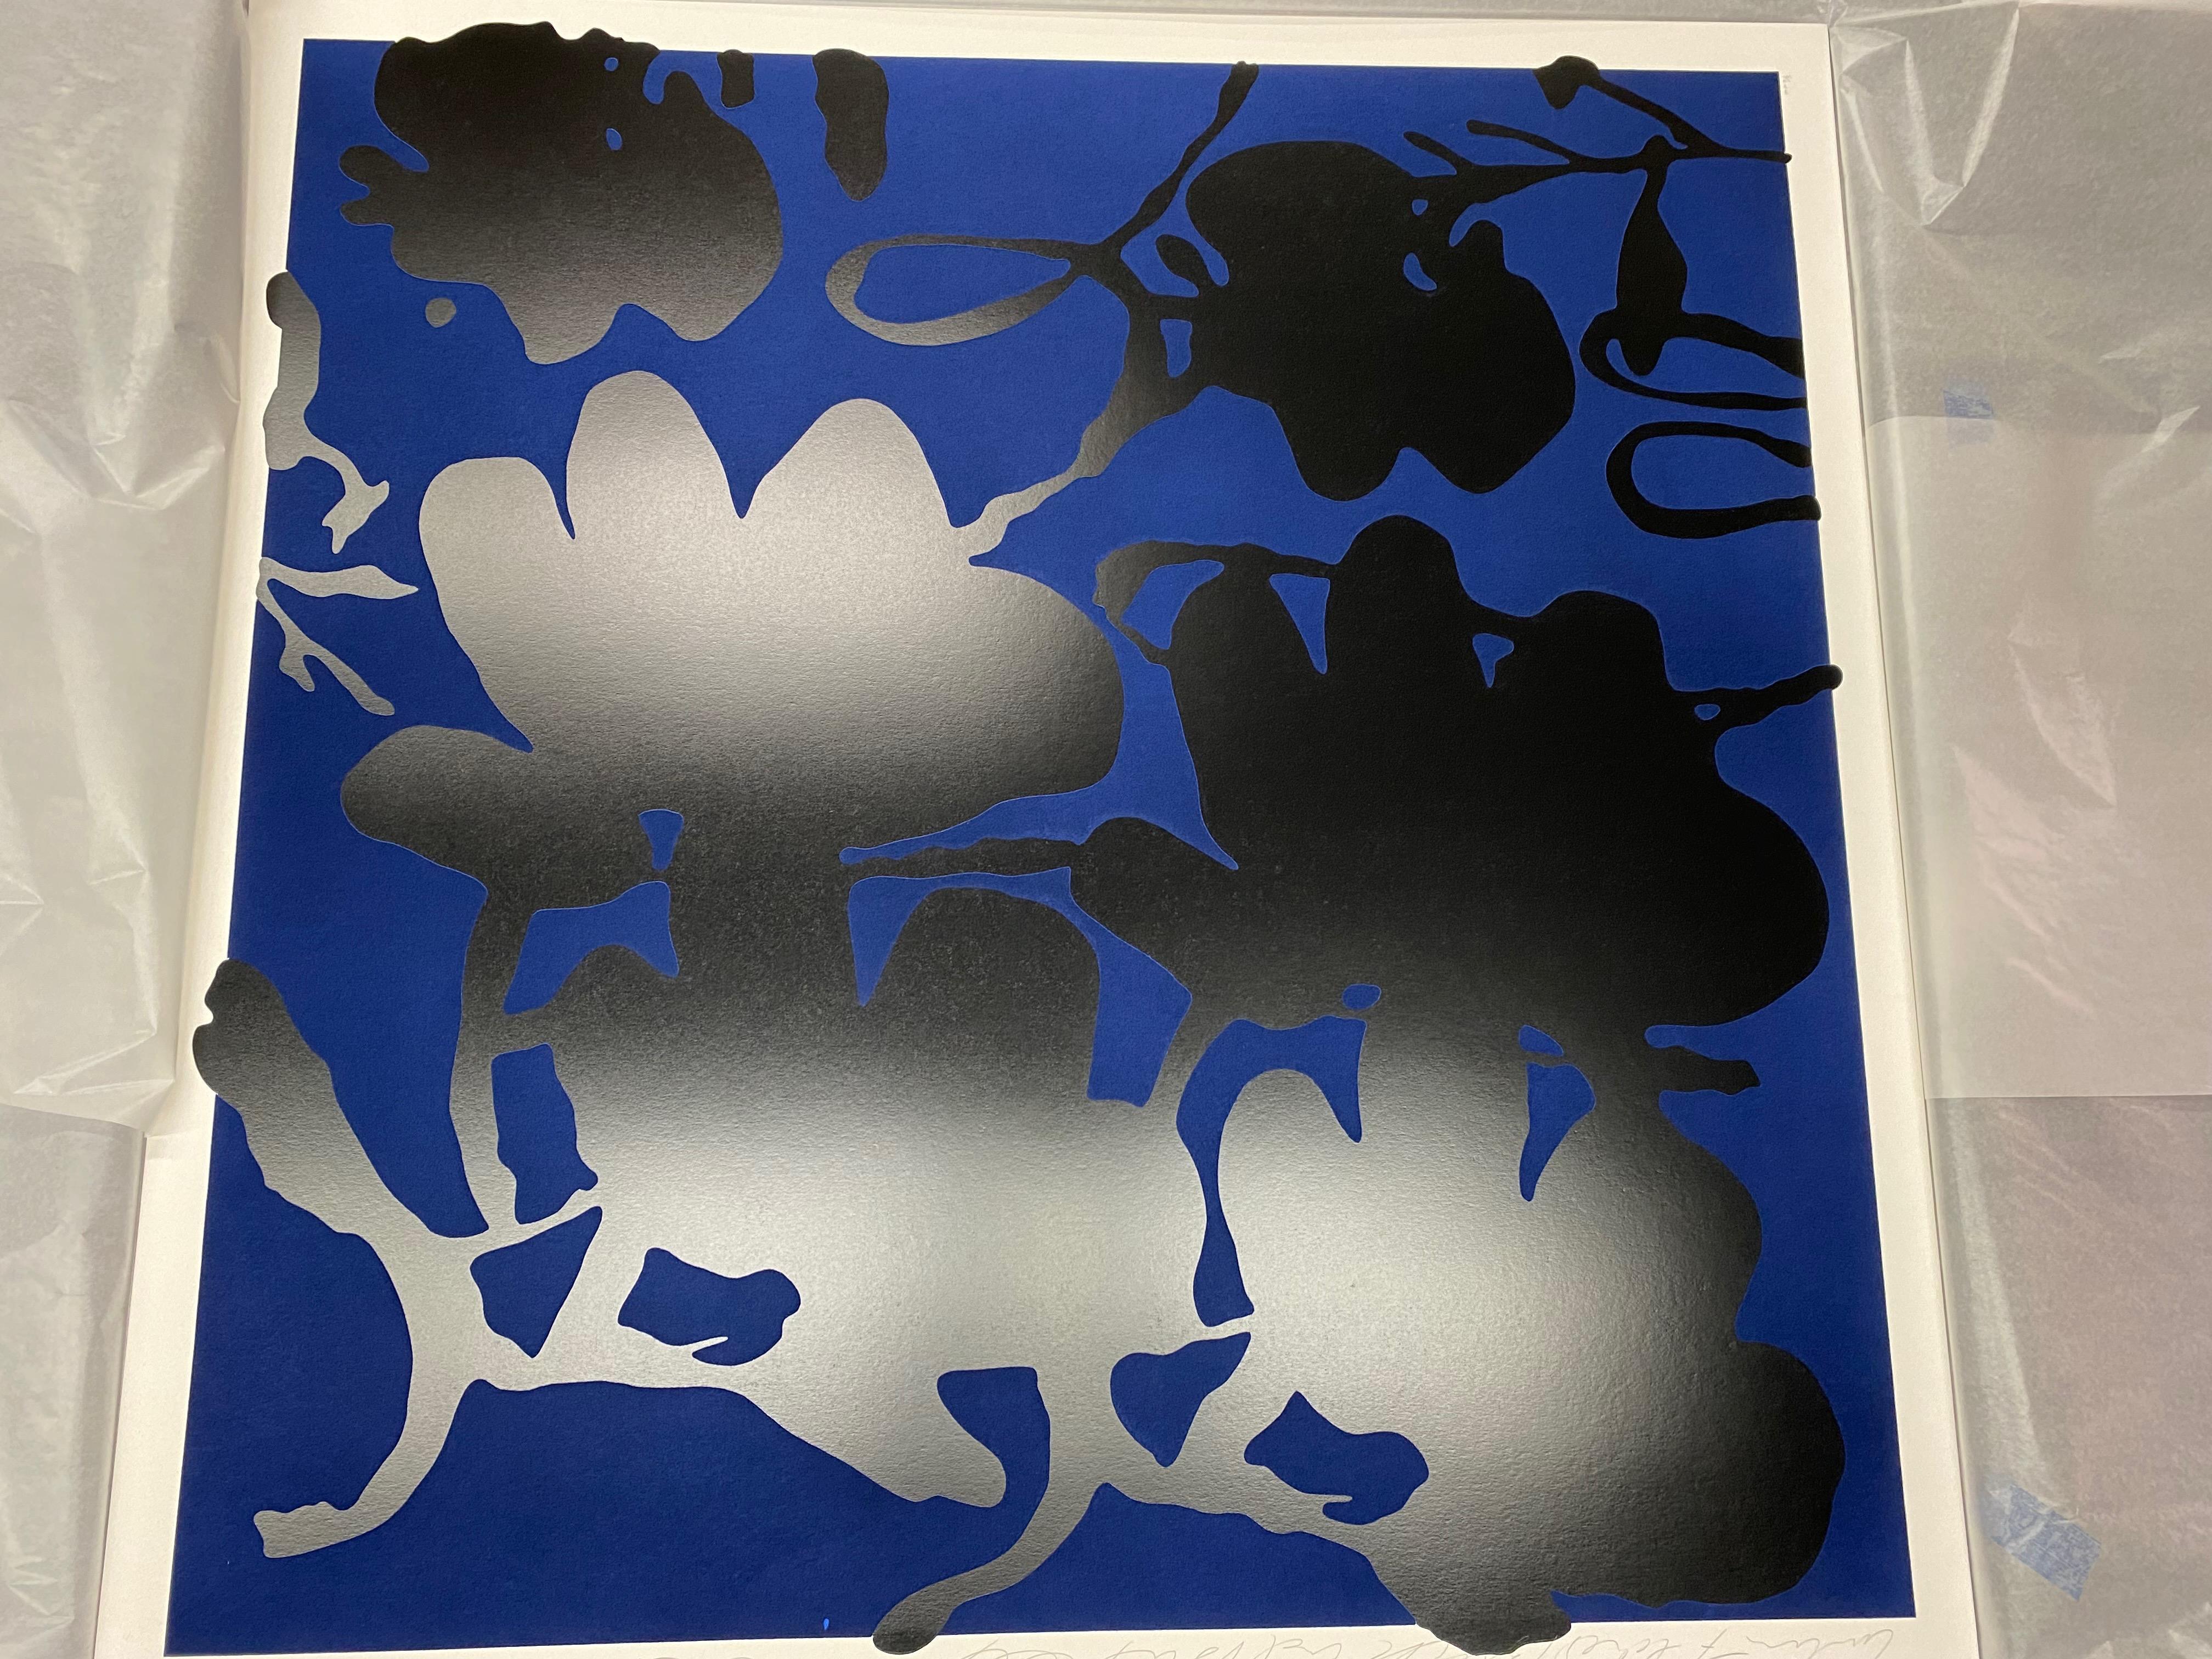 Lantern Flowers, Black and Blue from Big Lantern Flowers, 2017 - Contemporary Print by Donald Sultan